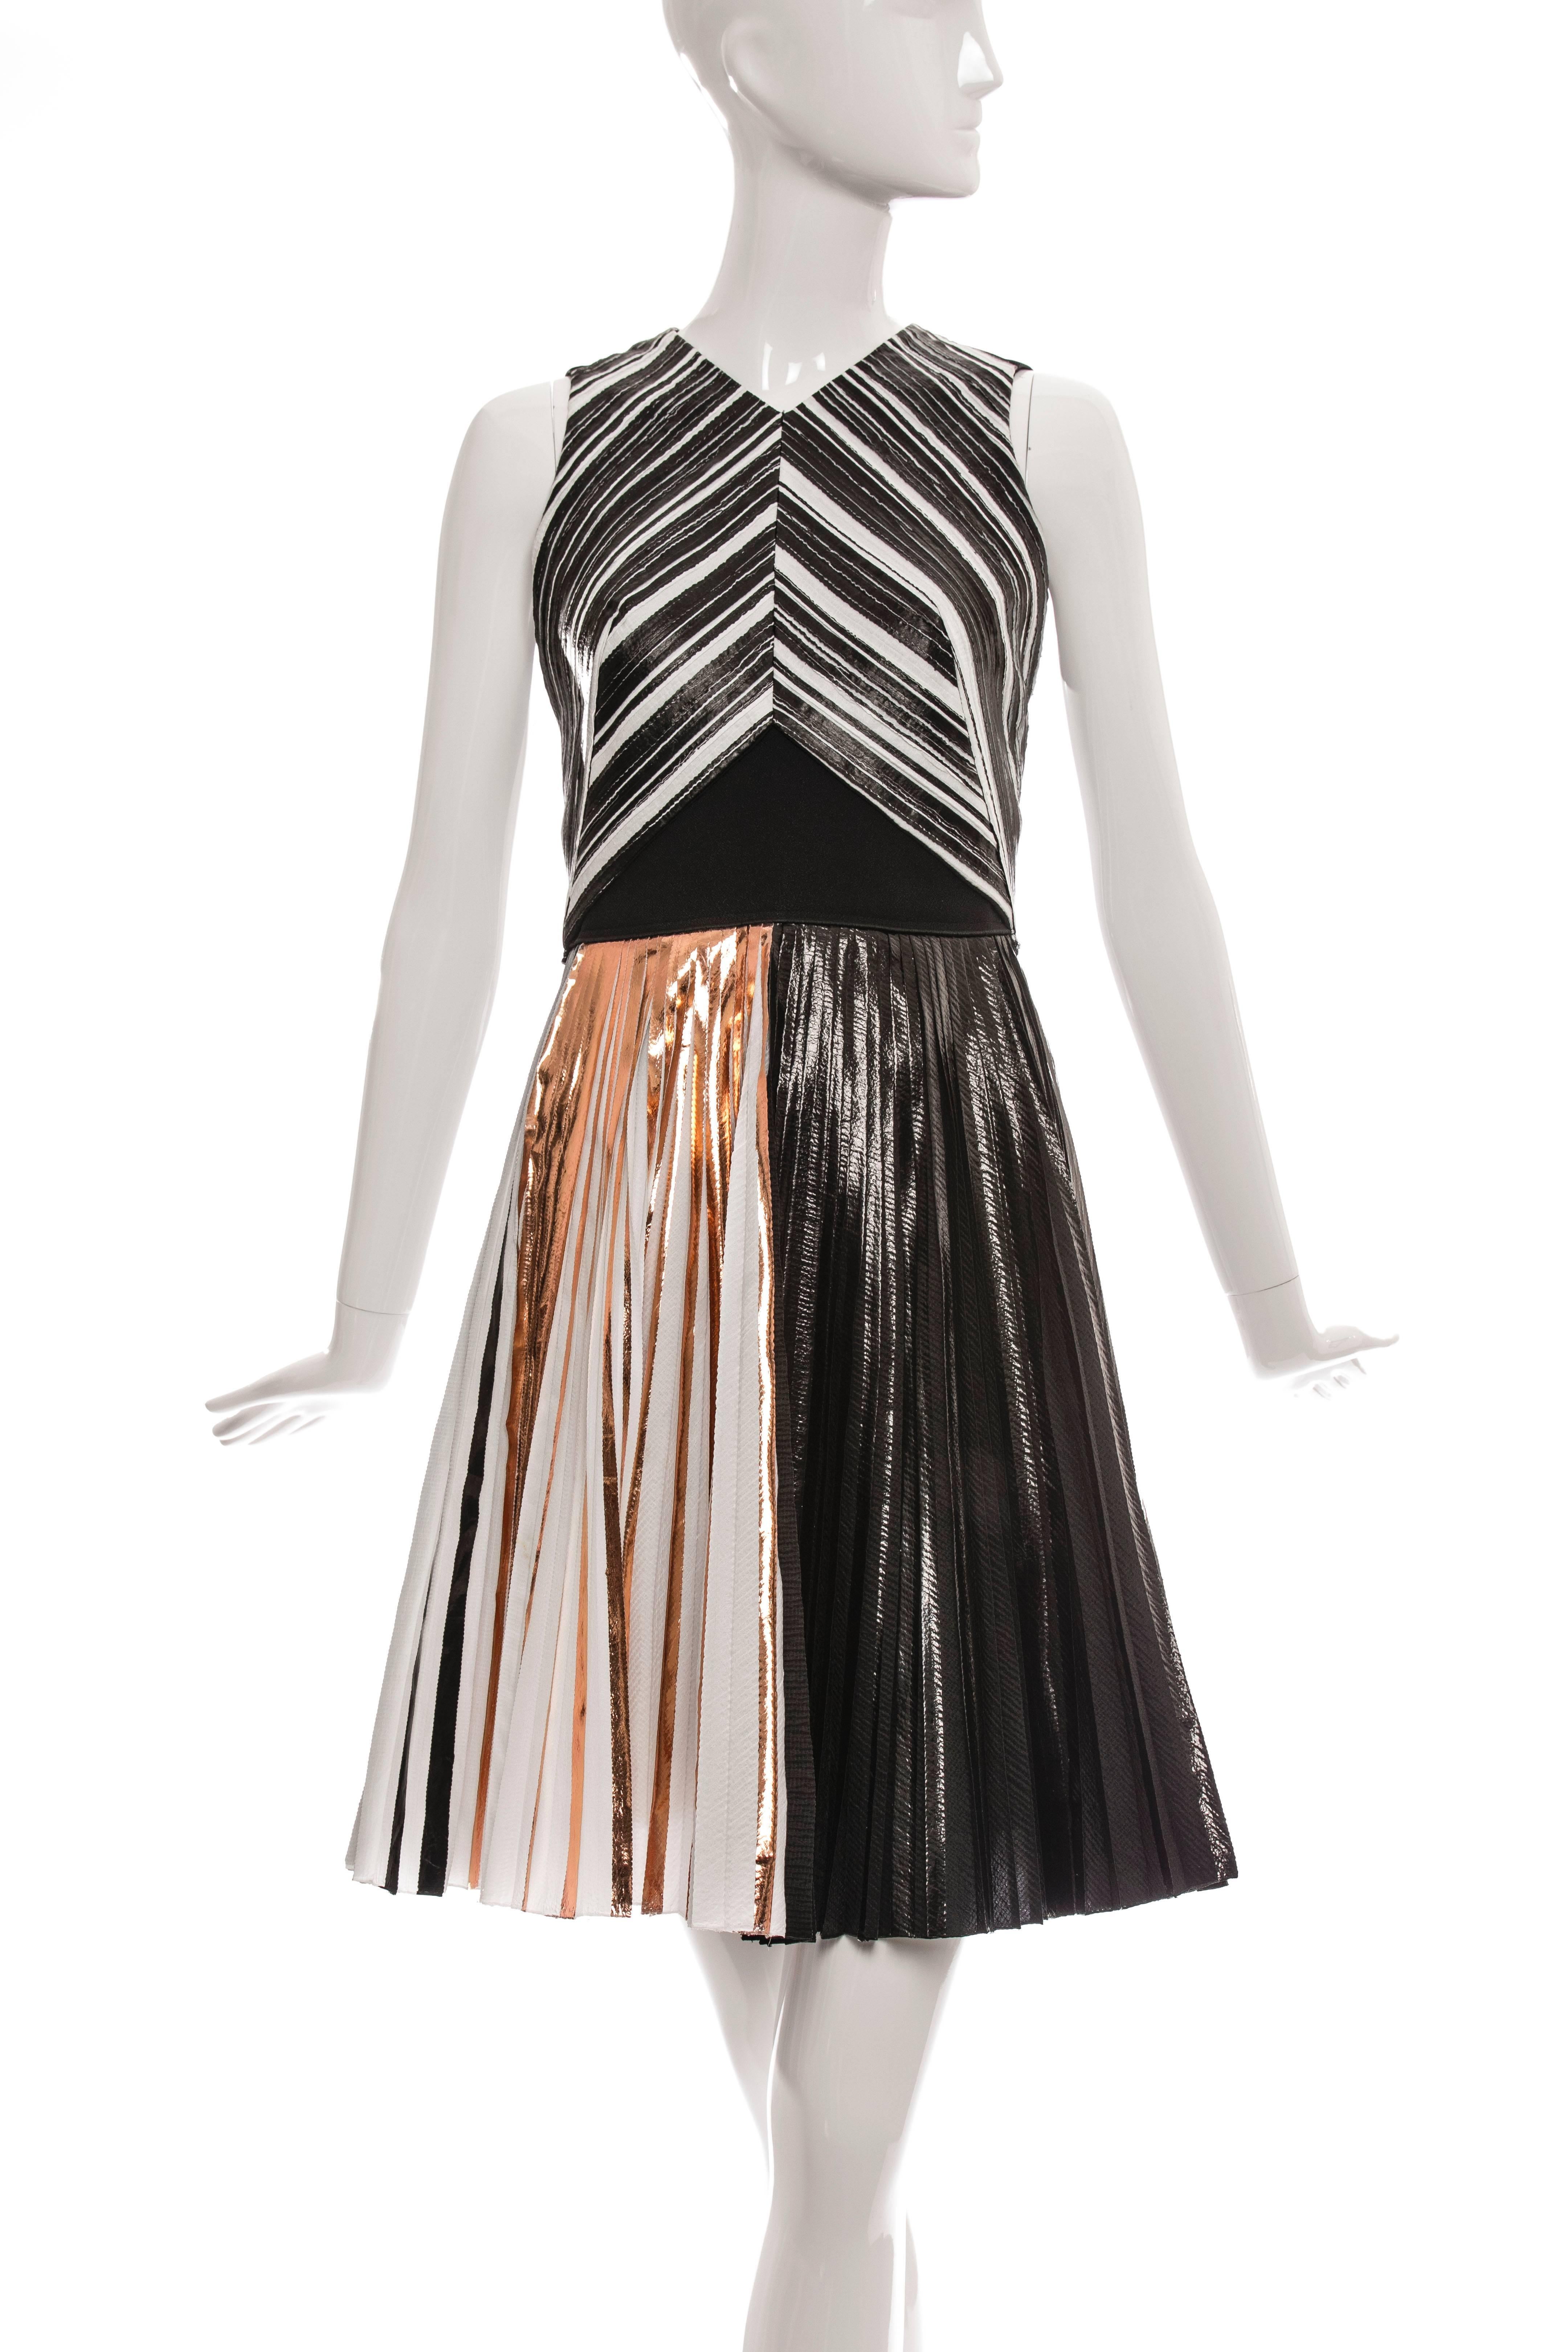 Proenza Schouler Spring-Summer 2014, black and multicolor sleeveless, crystal pleated dress with V-neck, striped print throughout and concealed zip closure at center back.

US. 2
Bust 28”, Waist 32”, Hip 32”, Length 36”